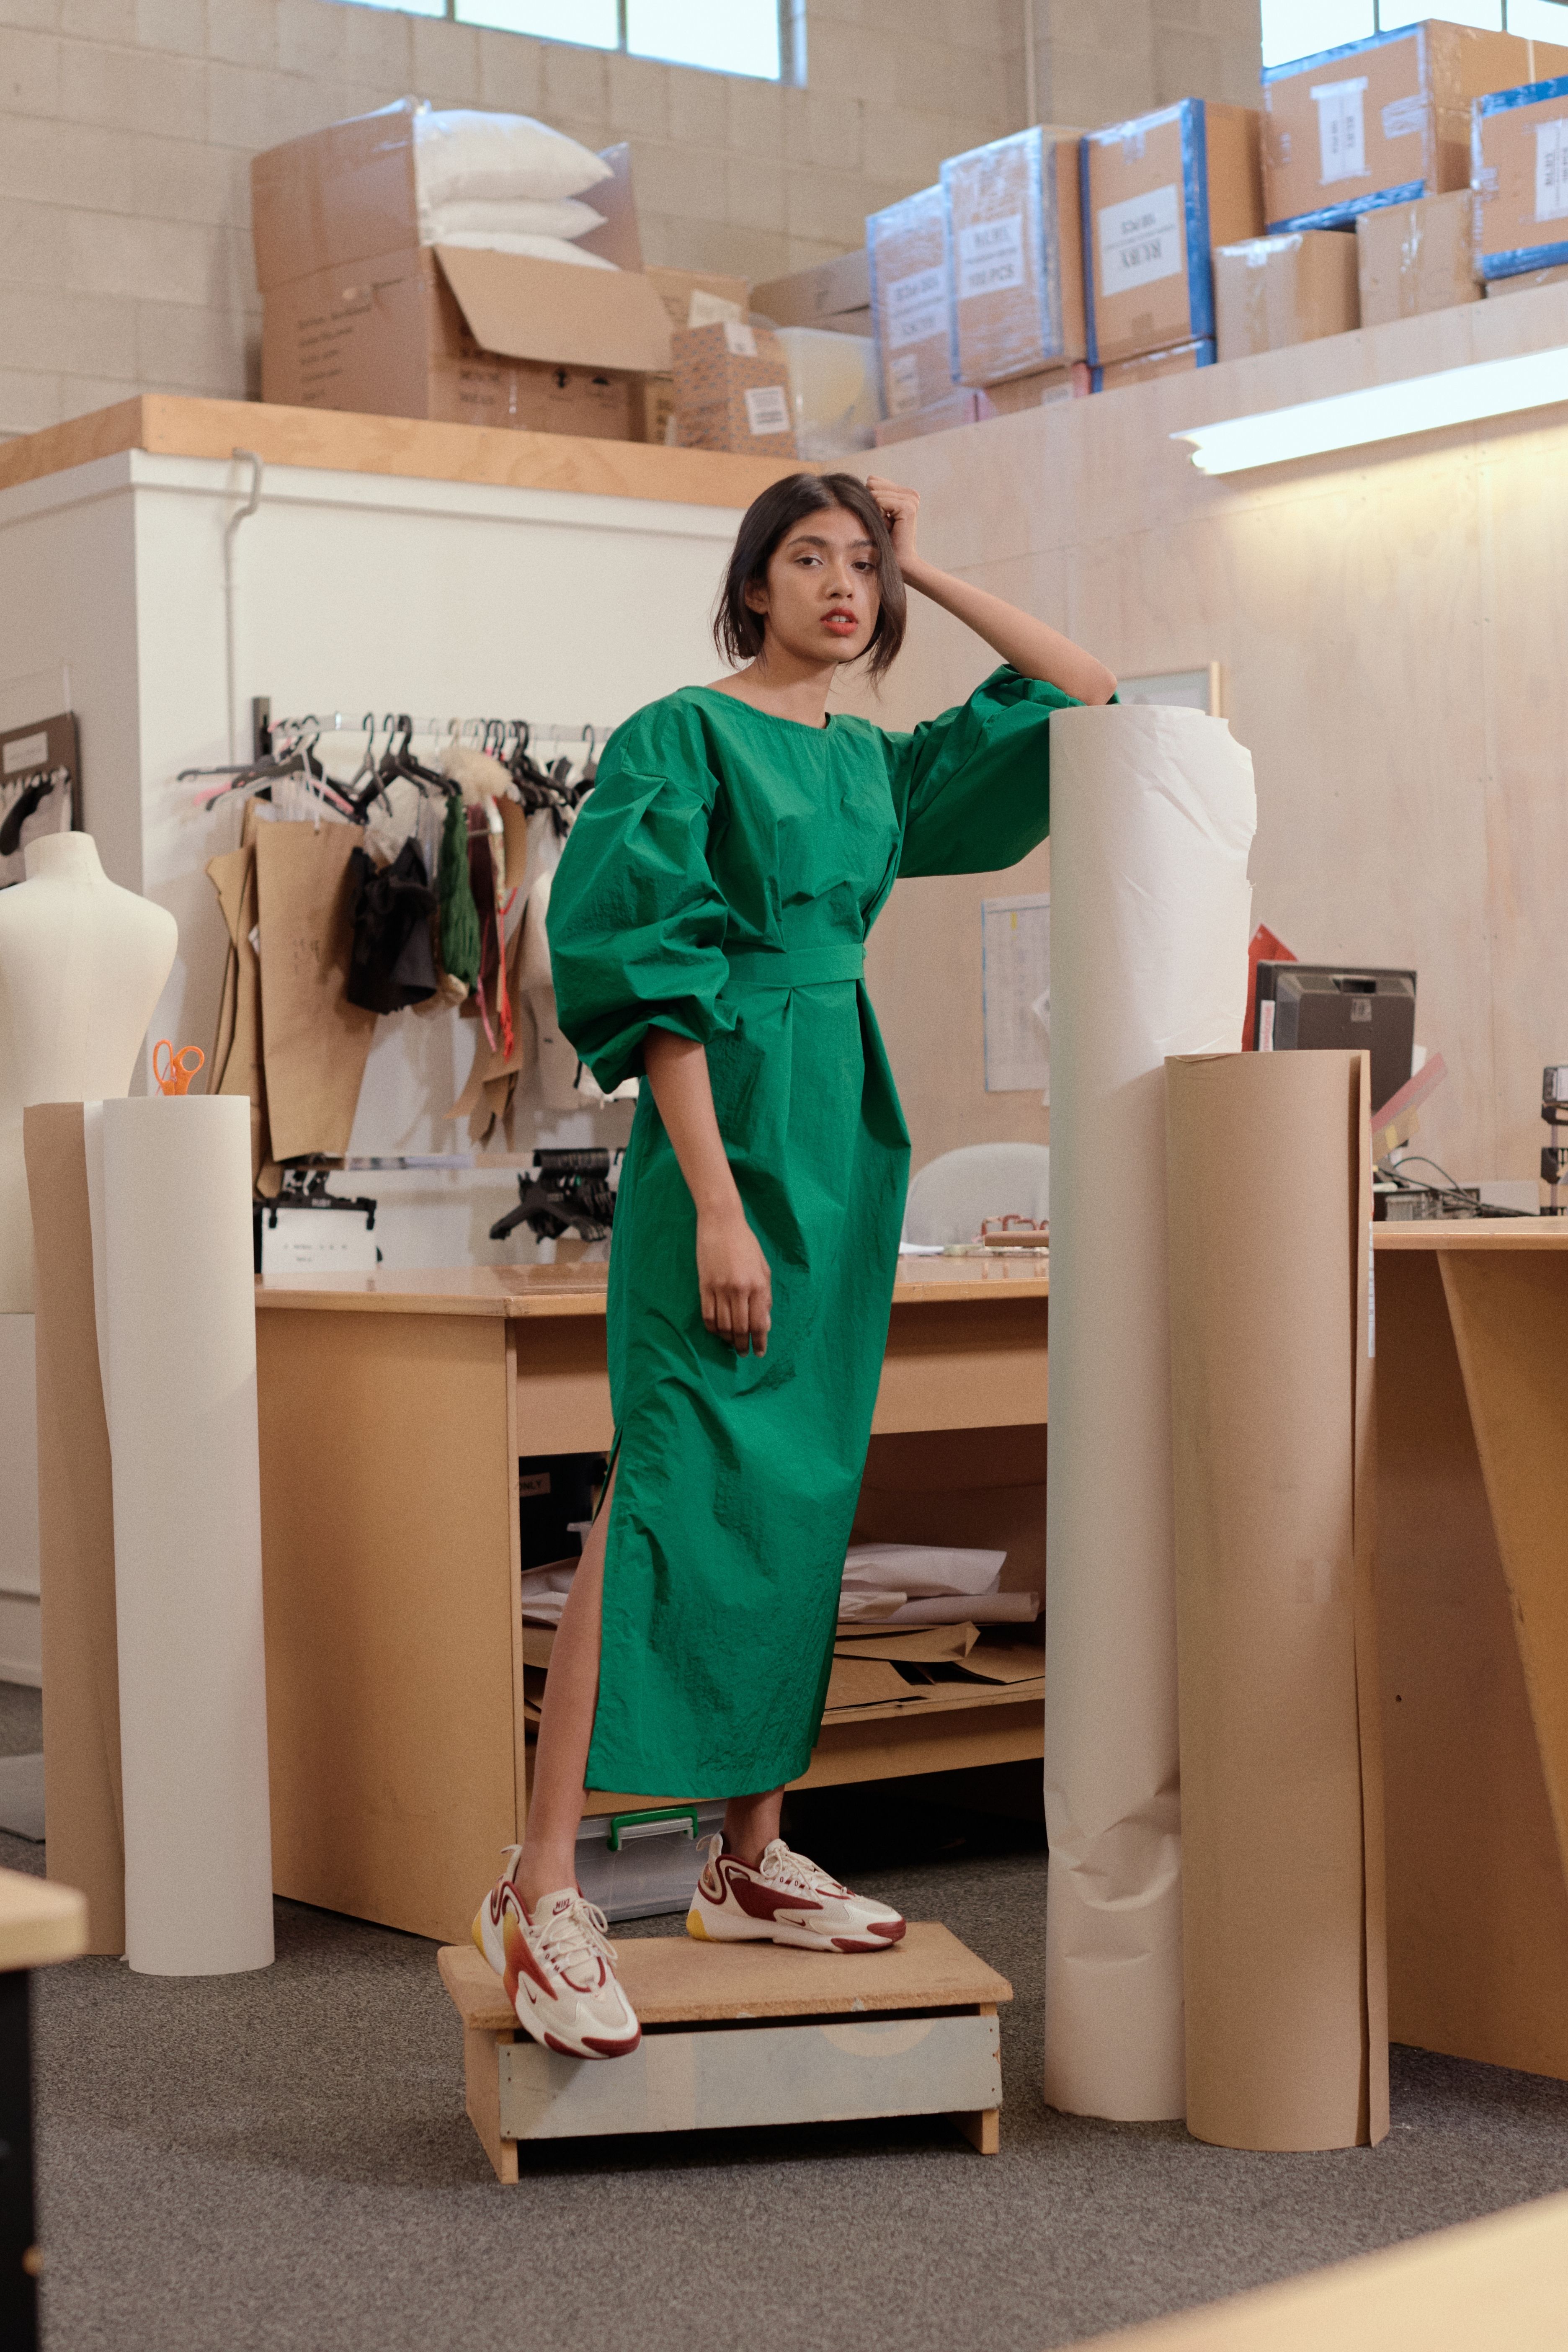 Are patterns the future of fashion? Liam the label wants you to do it yourself